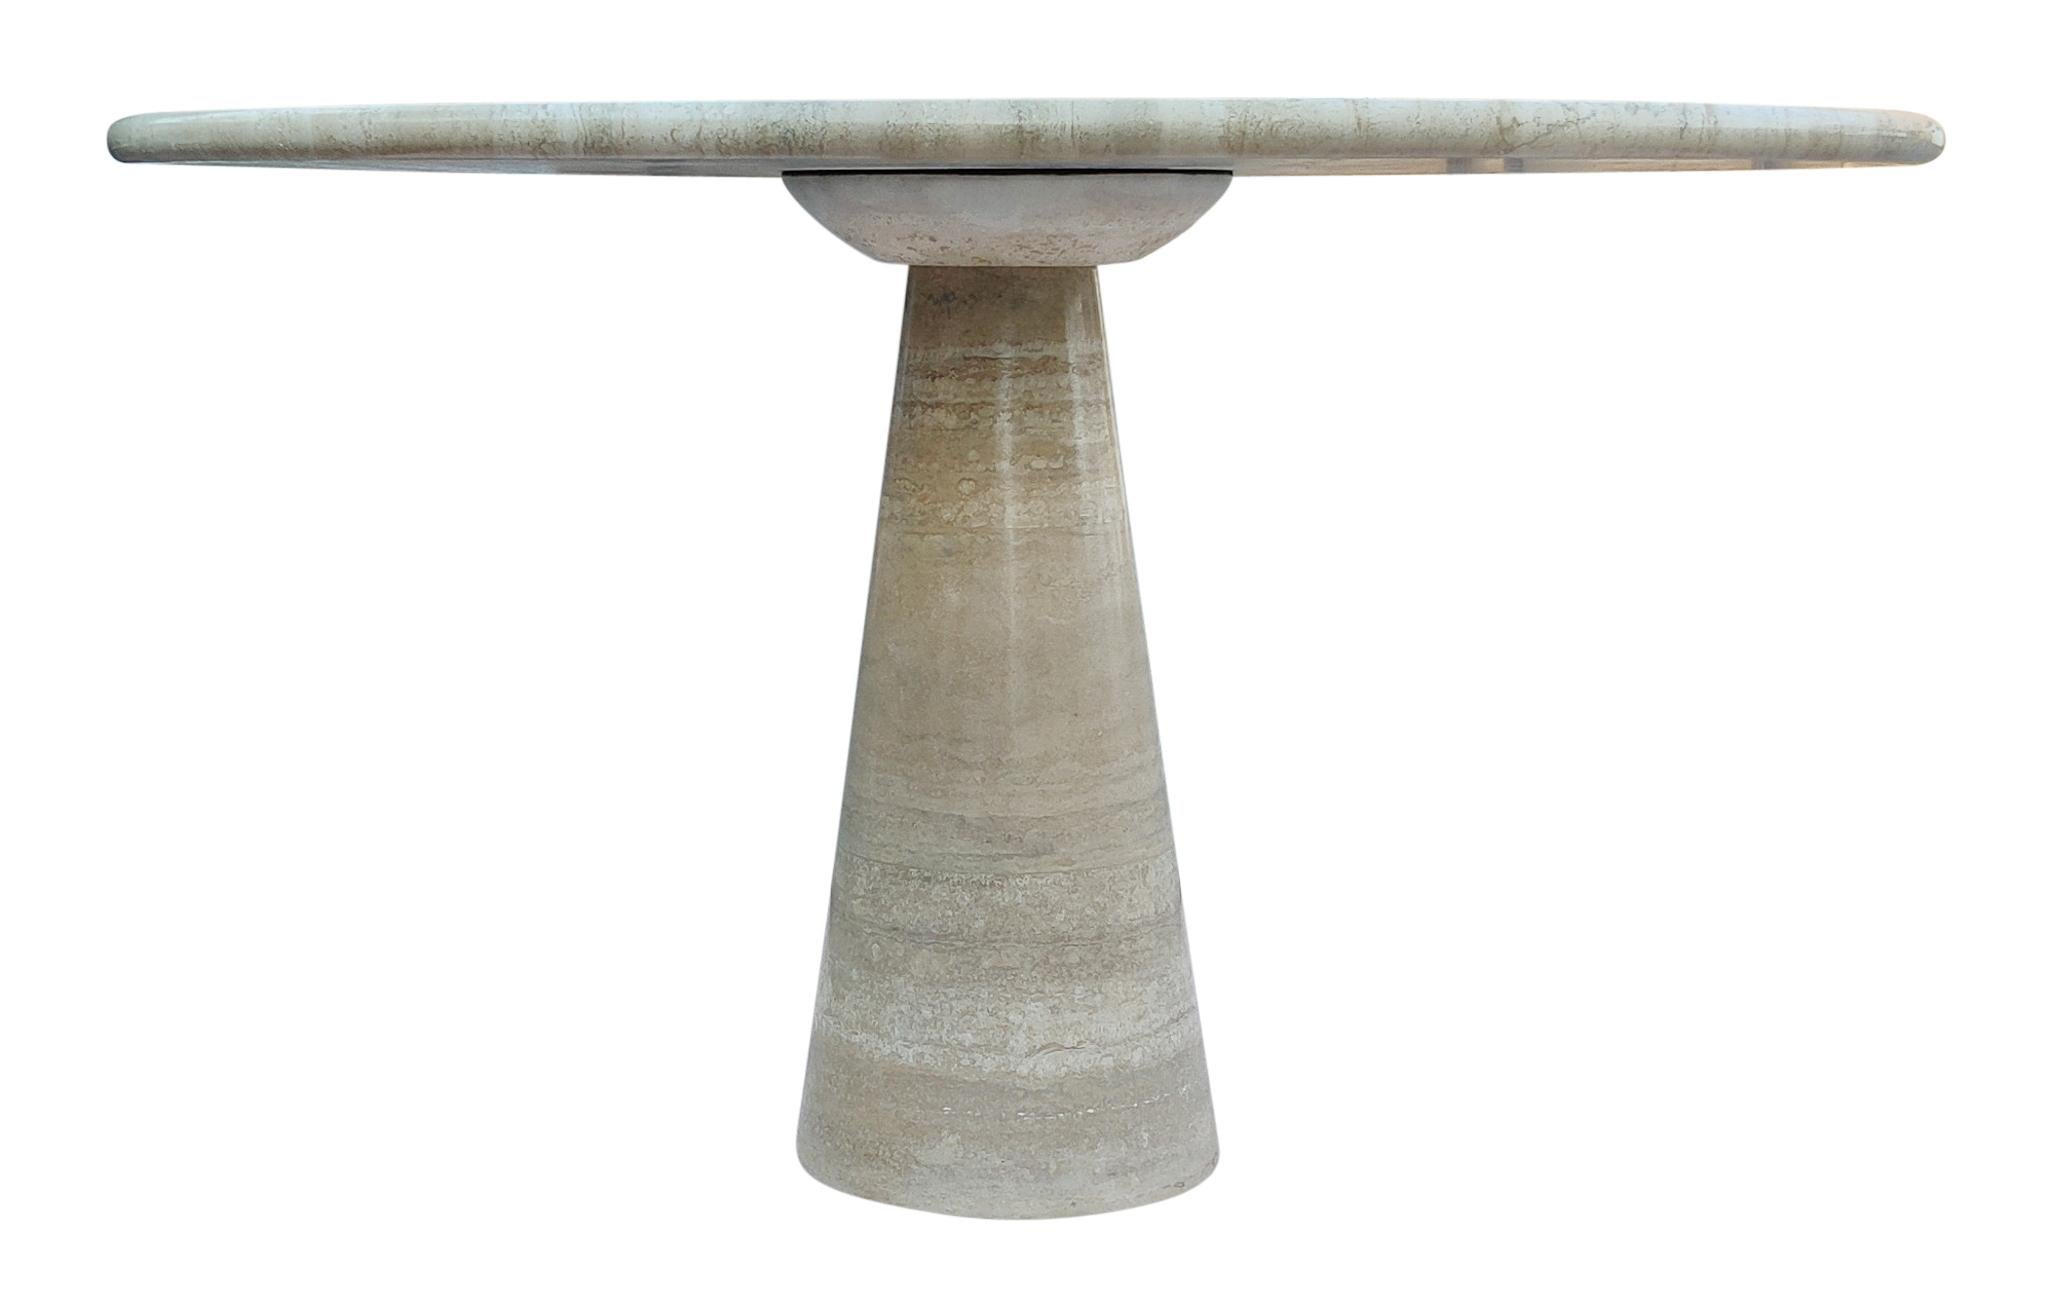 Polished Angelo Mangiarotti Attributed Round Travertine Pedestal Dining Table For Sale